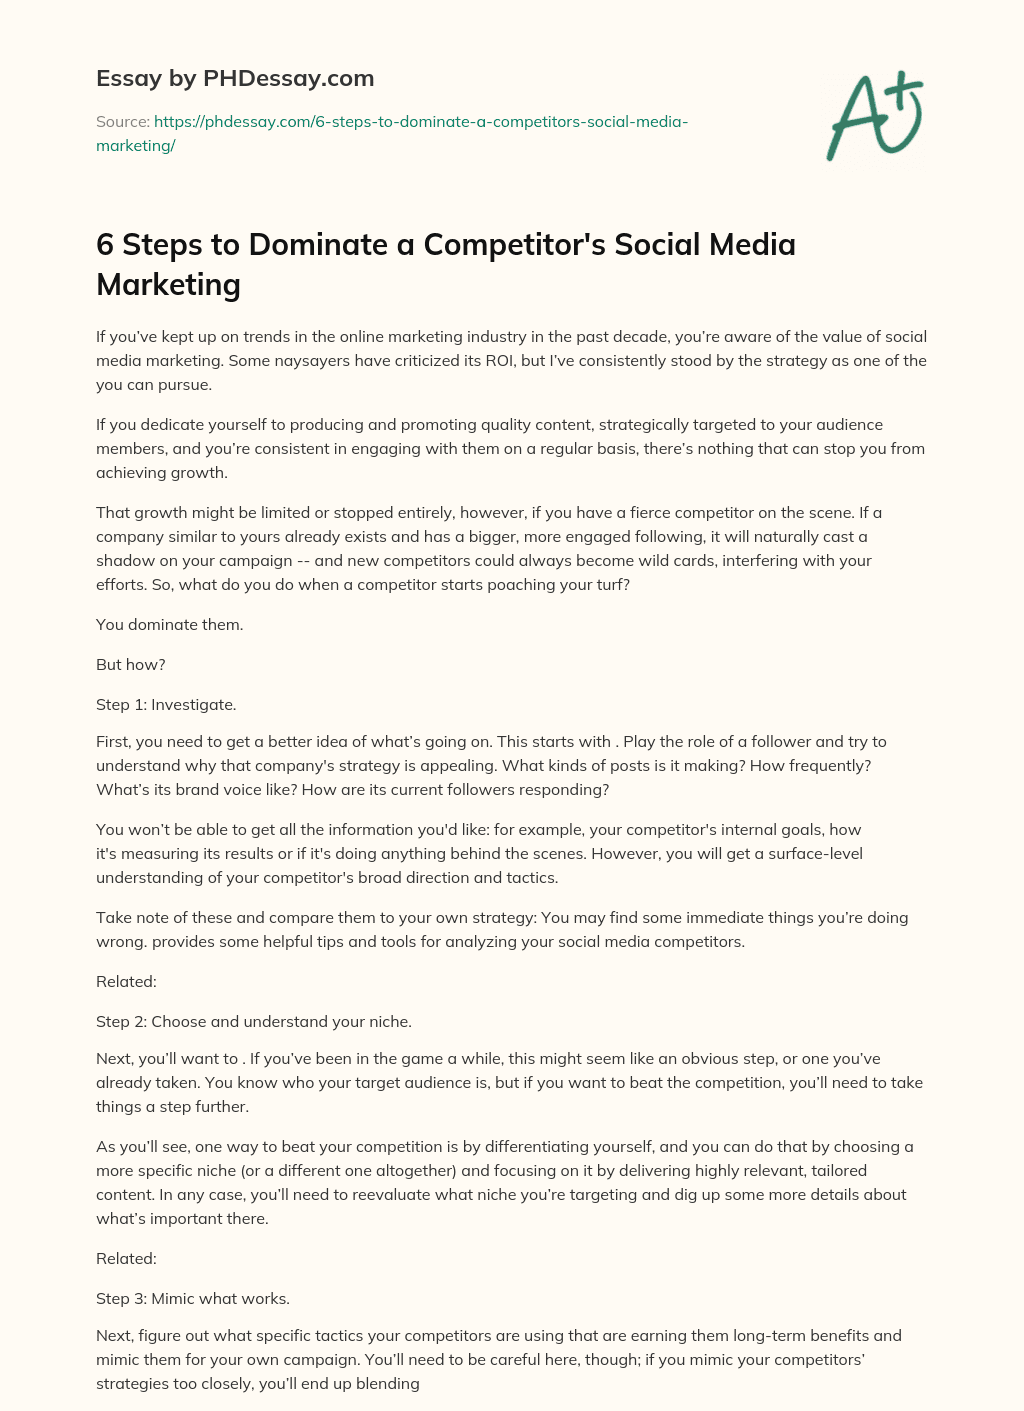 6 Steps to Dominate a Competitor’s Social Media Marketing essay